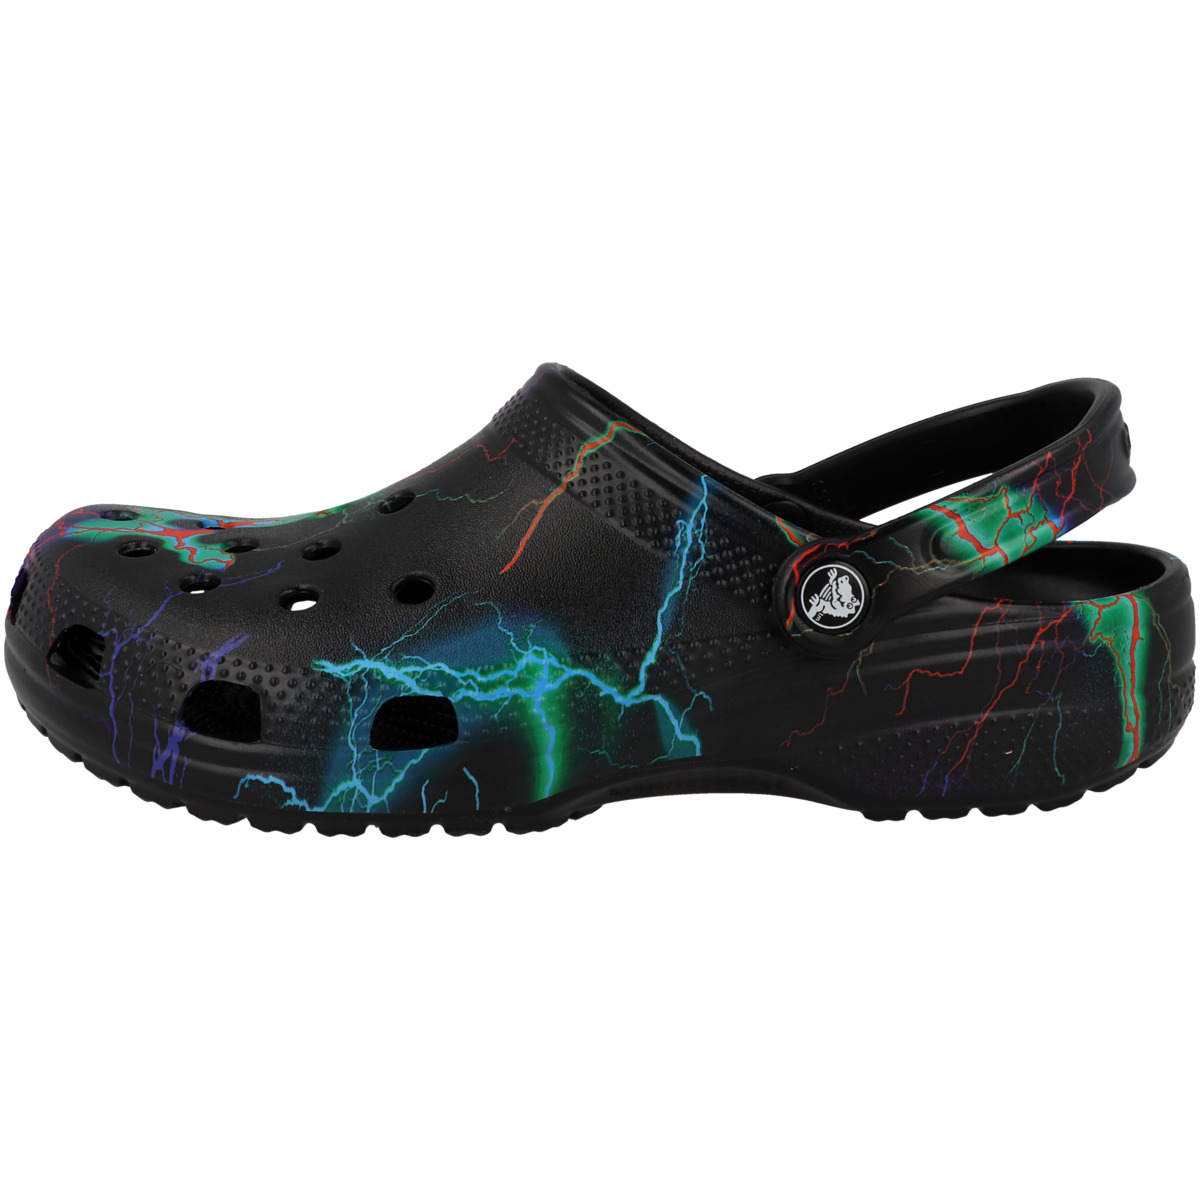 Crocs Classic Out of this World II Clogs multicolor